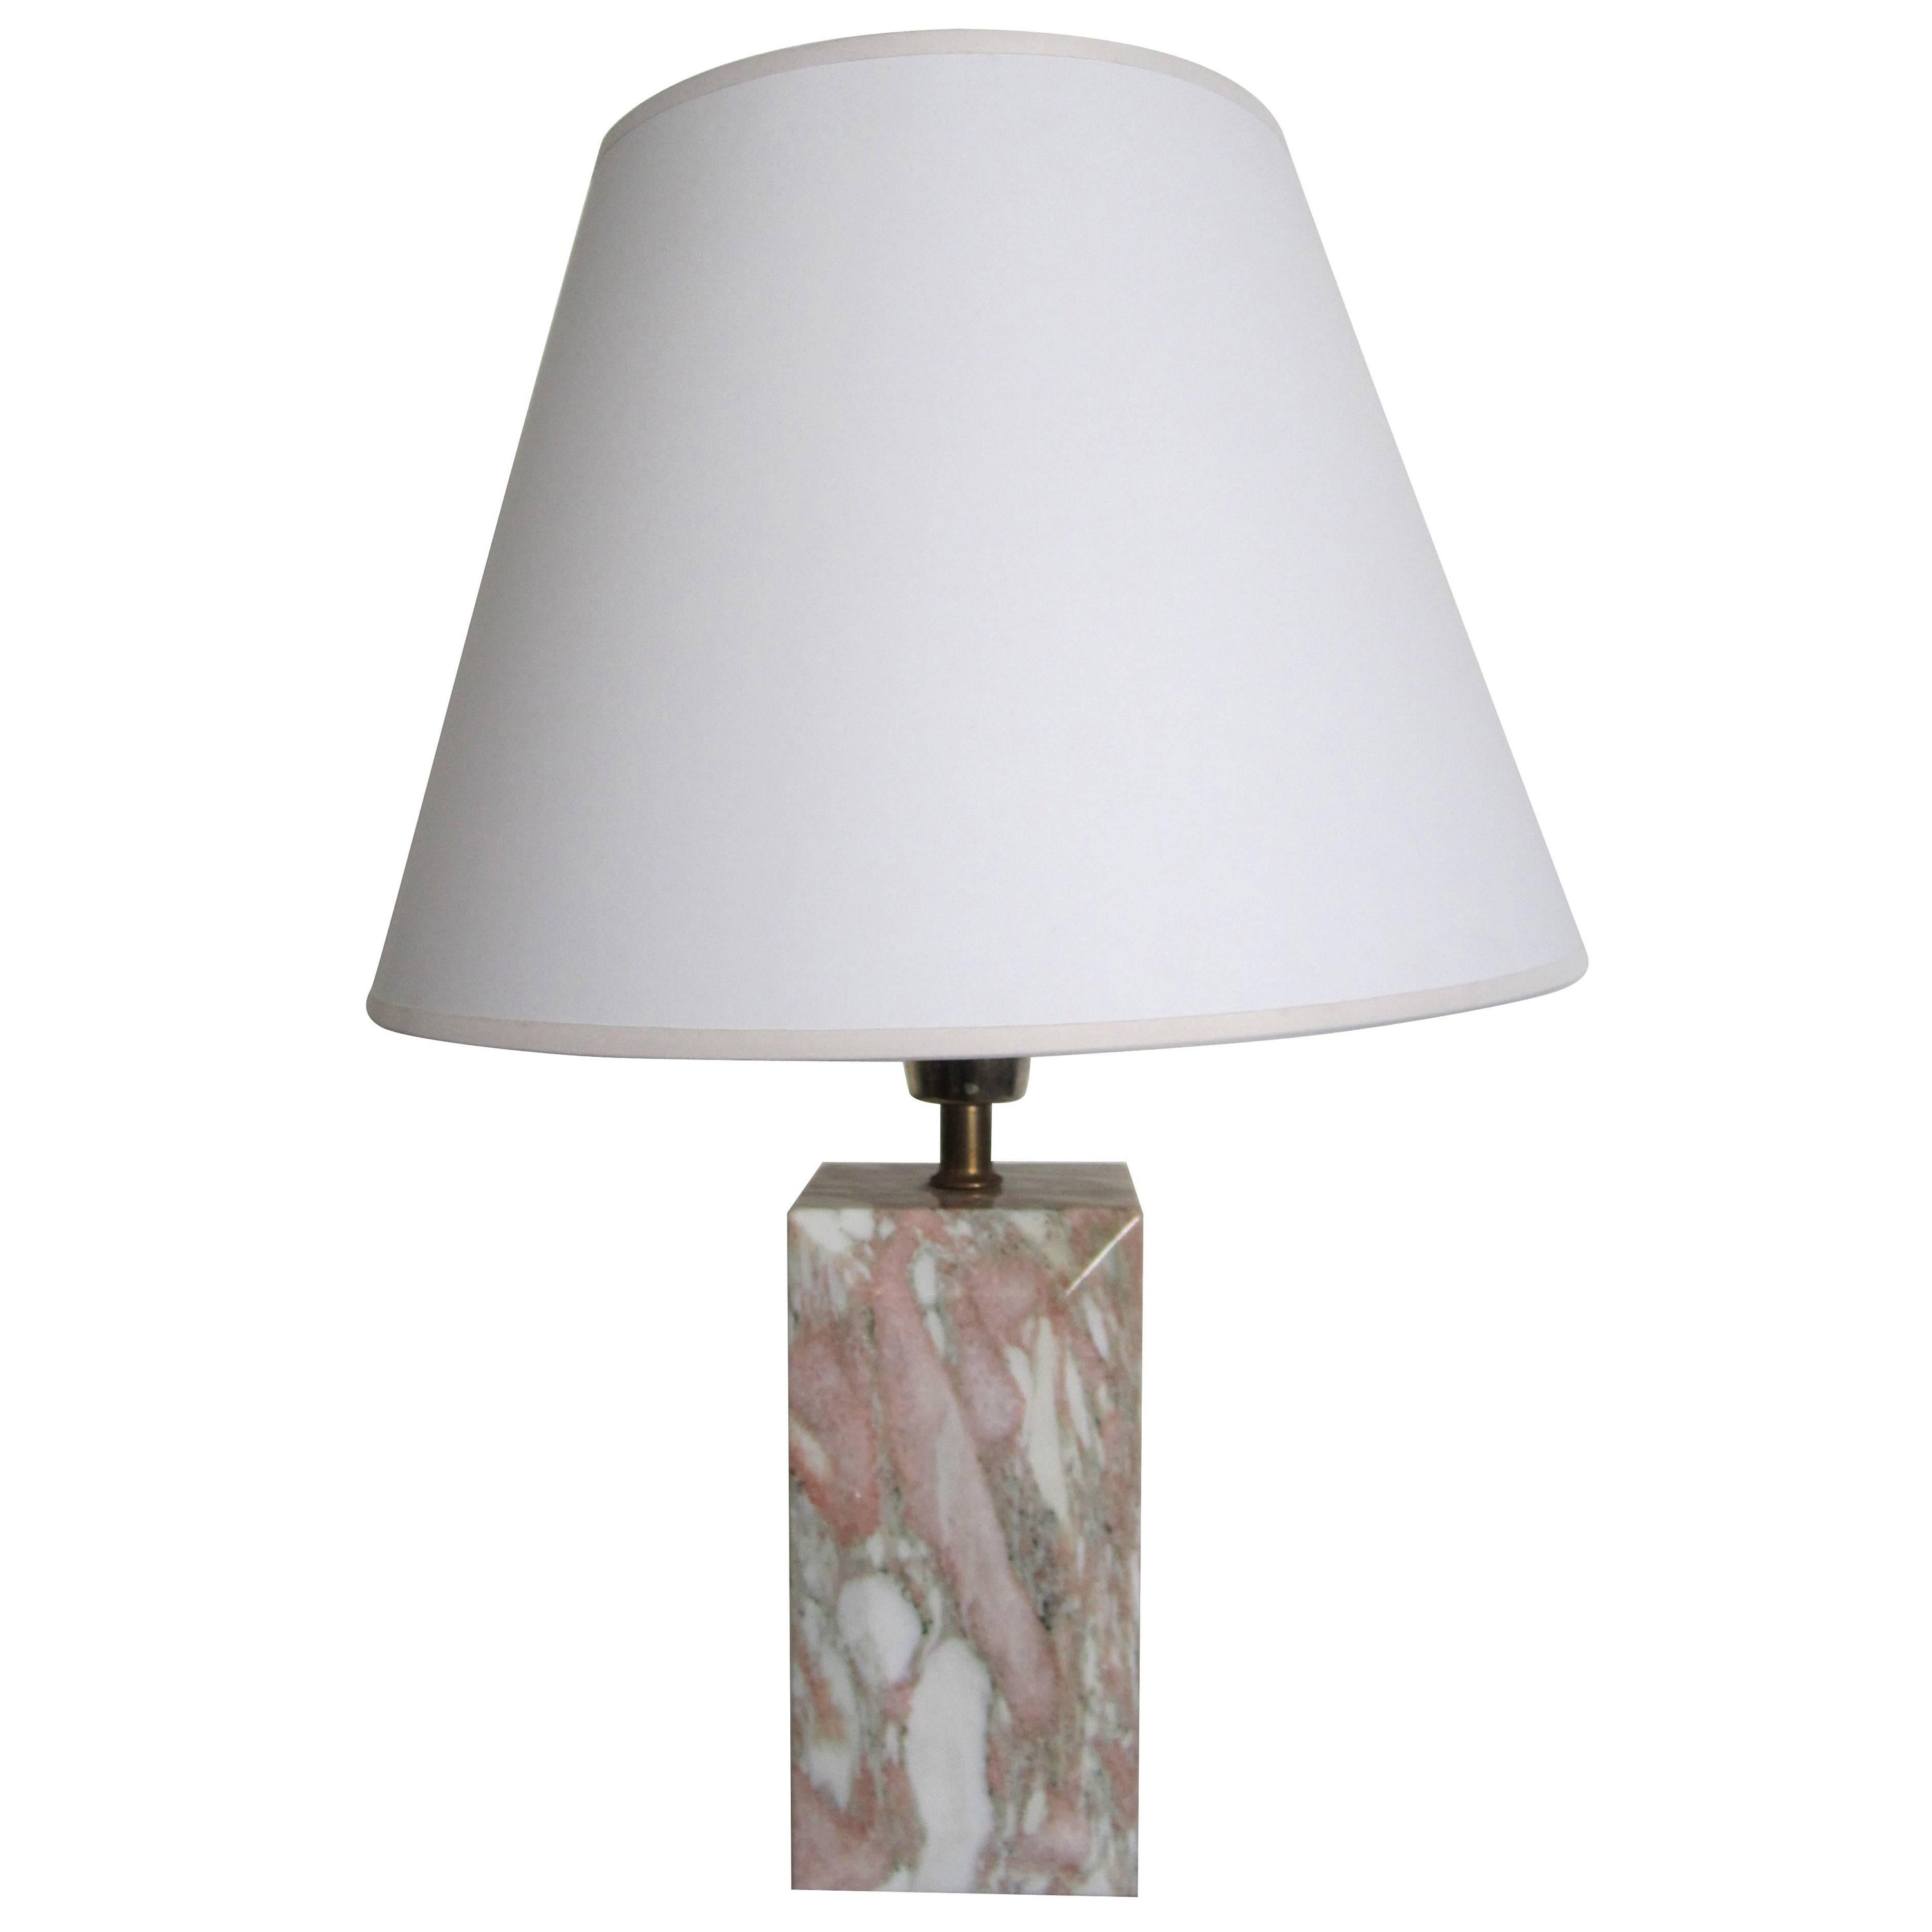 Marble Desk or Table Lamp in Pink and White, circa 1970s For Sale